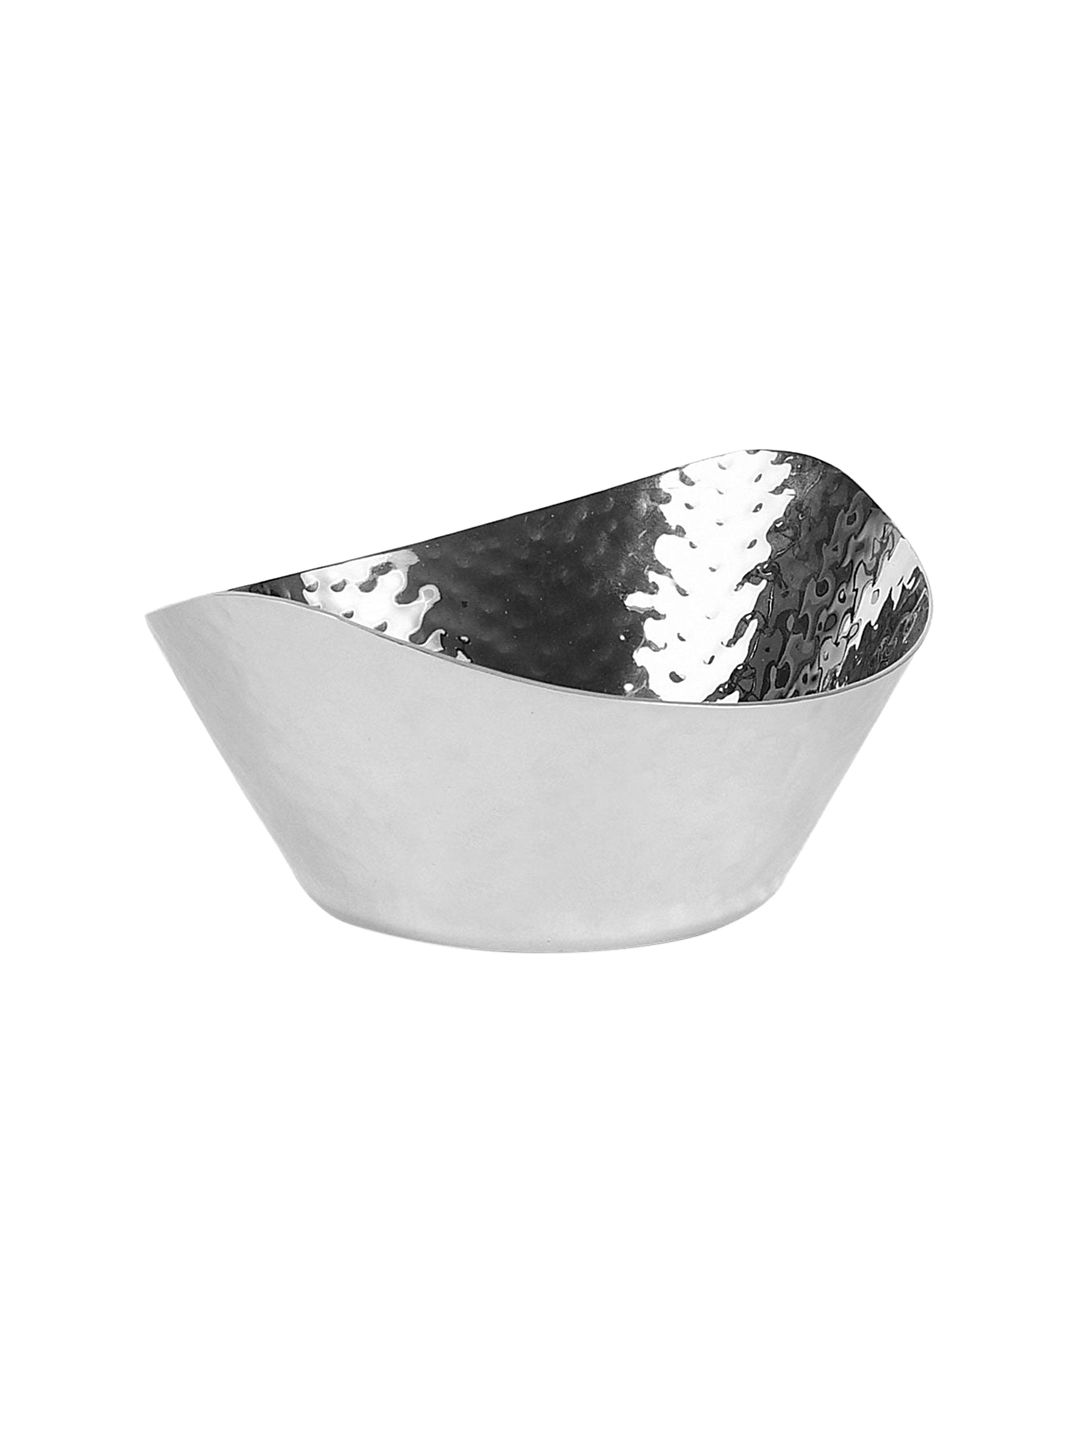 Athome by Nilkamal Silver-Toned Textured & Boat Shaped Snack Bowl Price in India